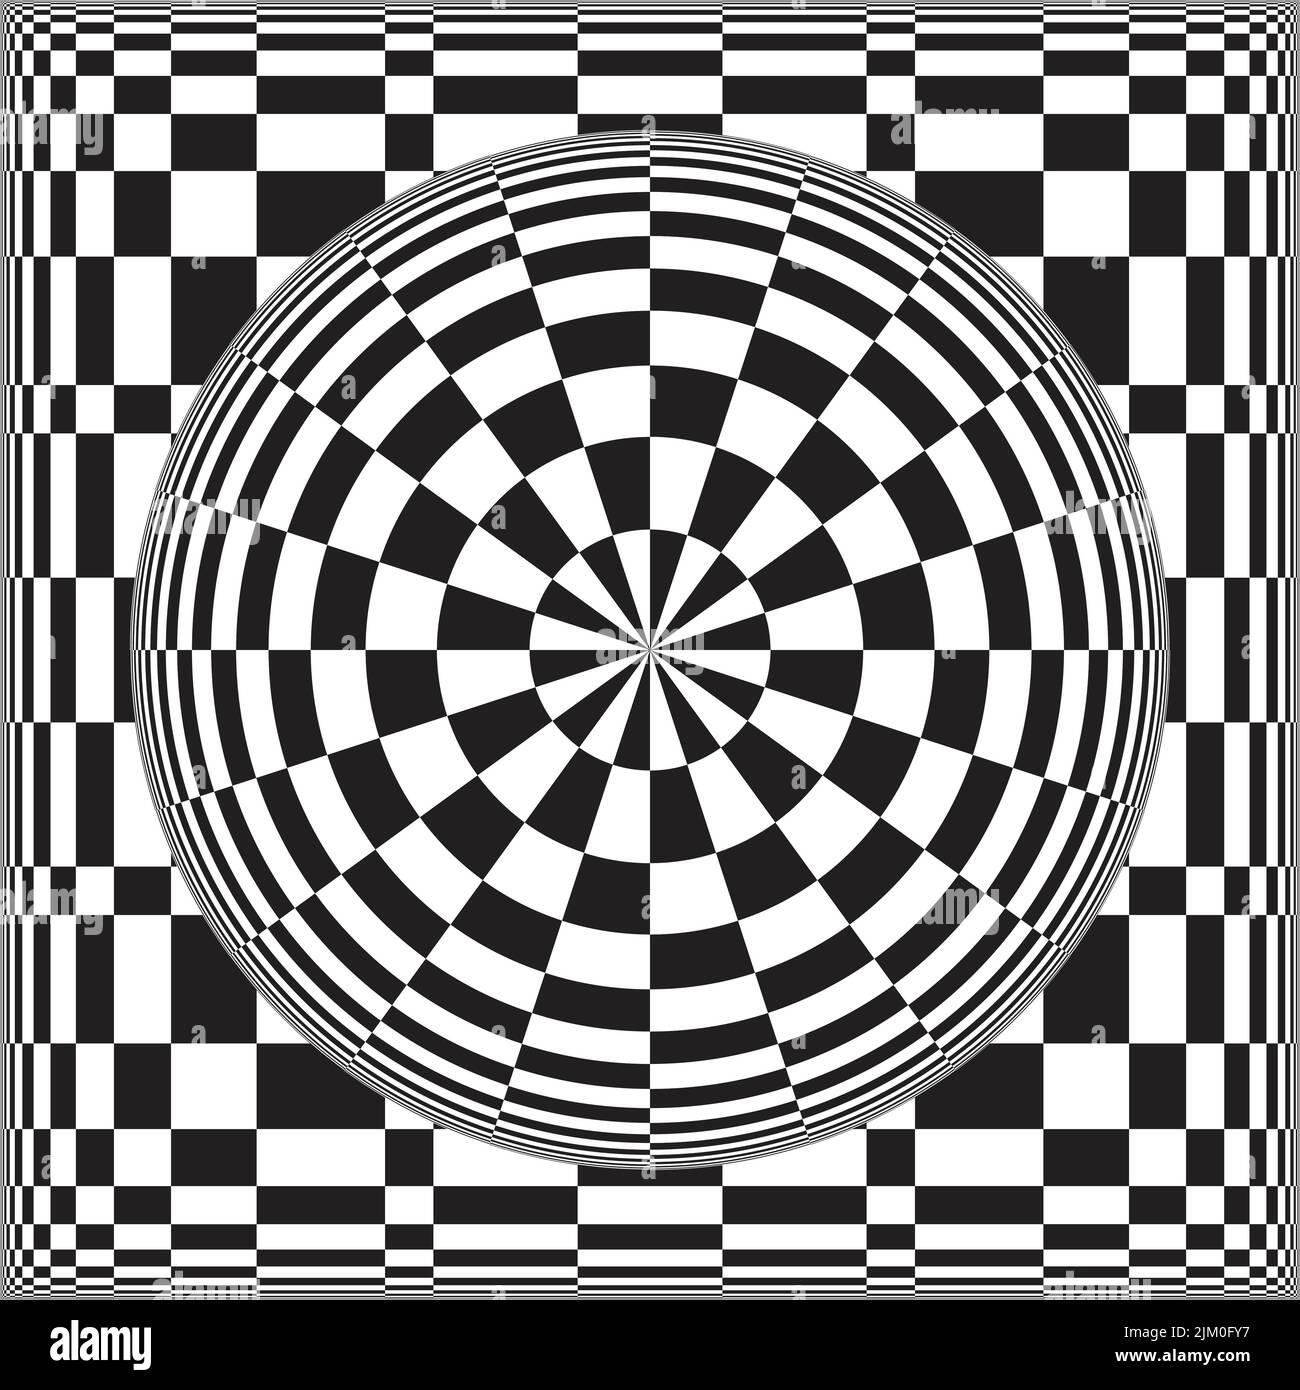 Black and white contrast create a faux 3d optical illusion. Geometric, distorted checker pattern. Target button on checkerboard. Psychedelic and trend Stock Vector